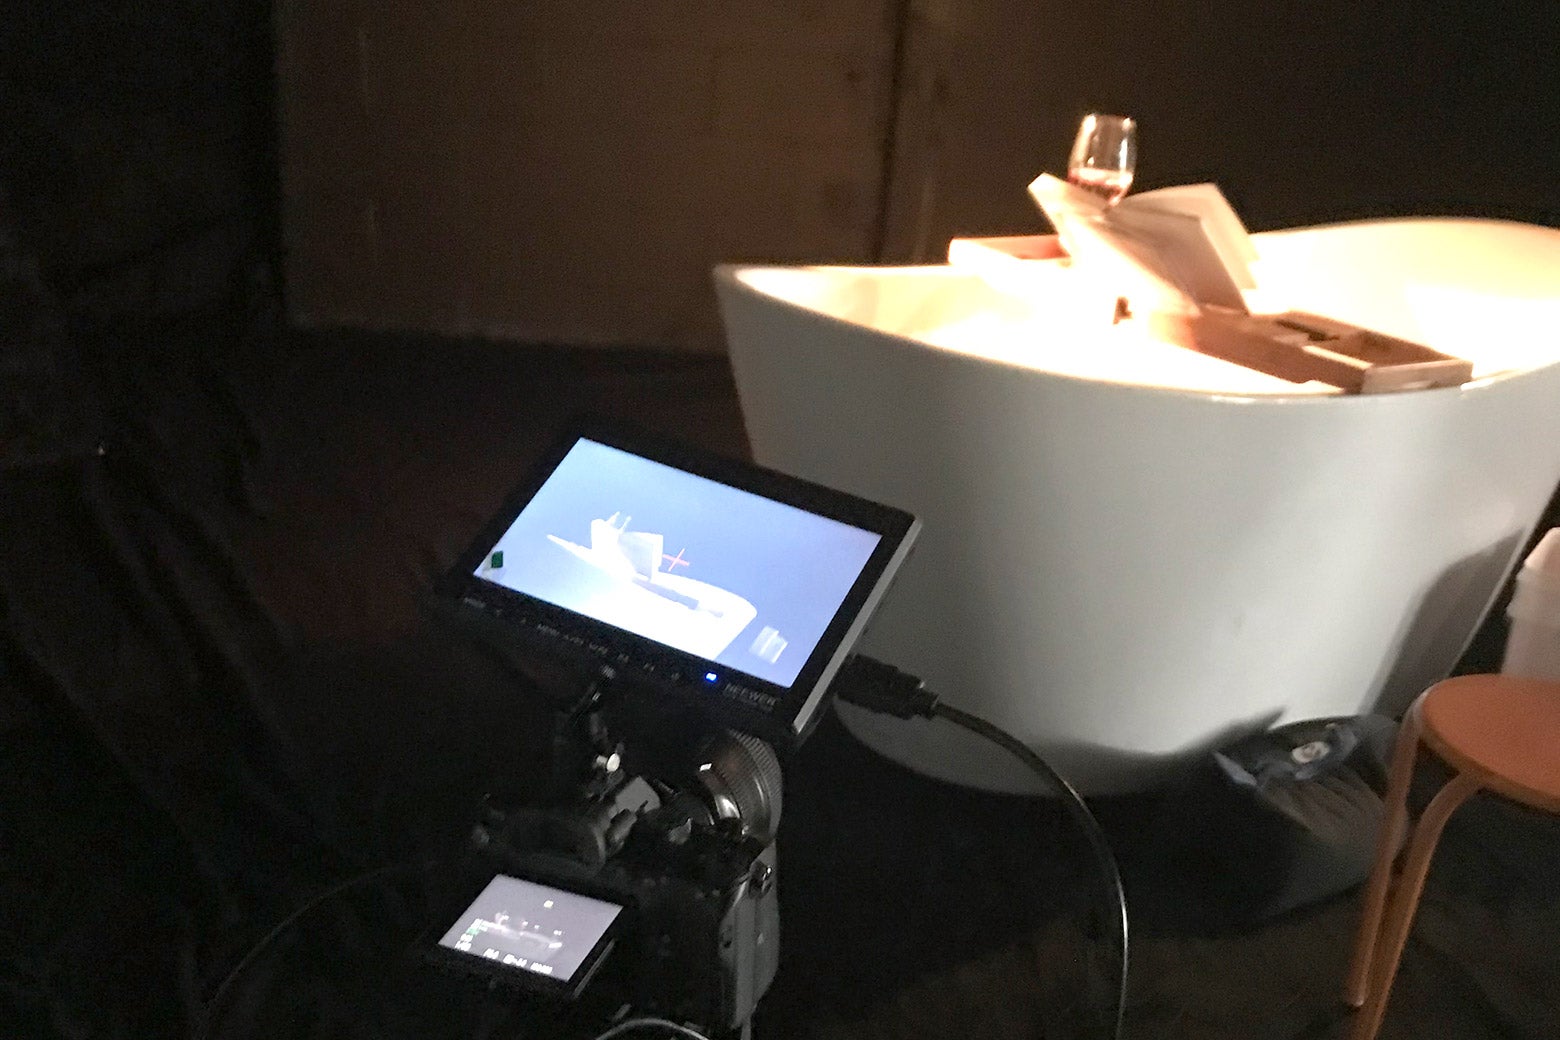 A camera pointed toward a bathtub with a book and a glass of wine on a tray over the tub.